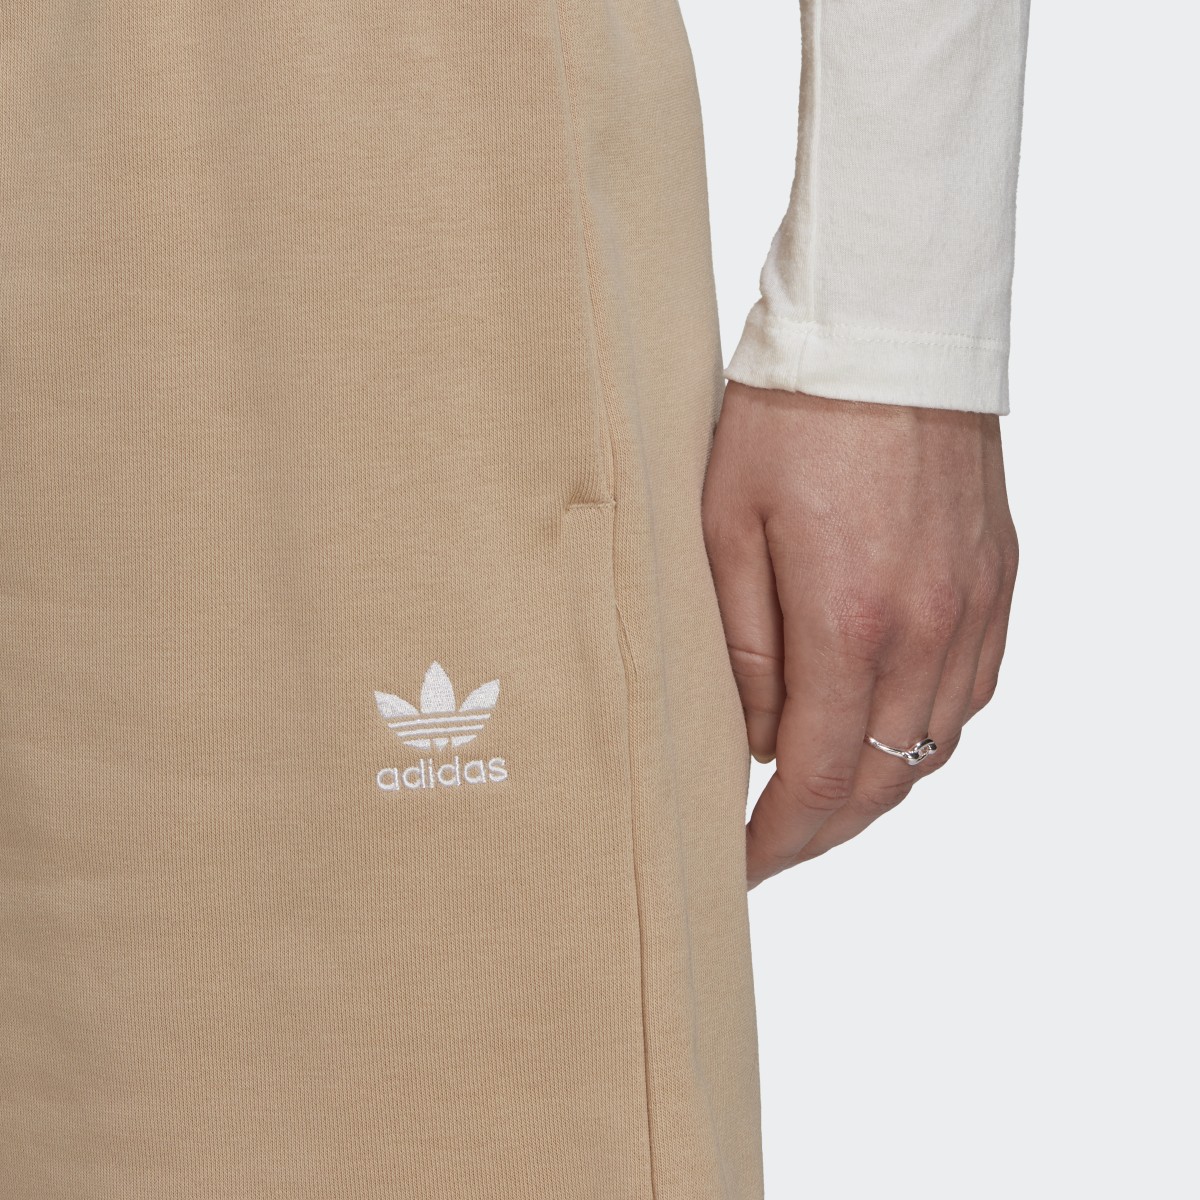 Adidas Adicolor Essentials French Terry Shorts. 5